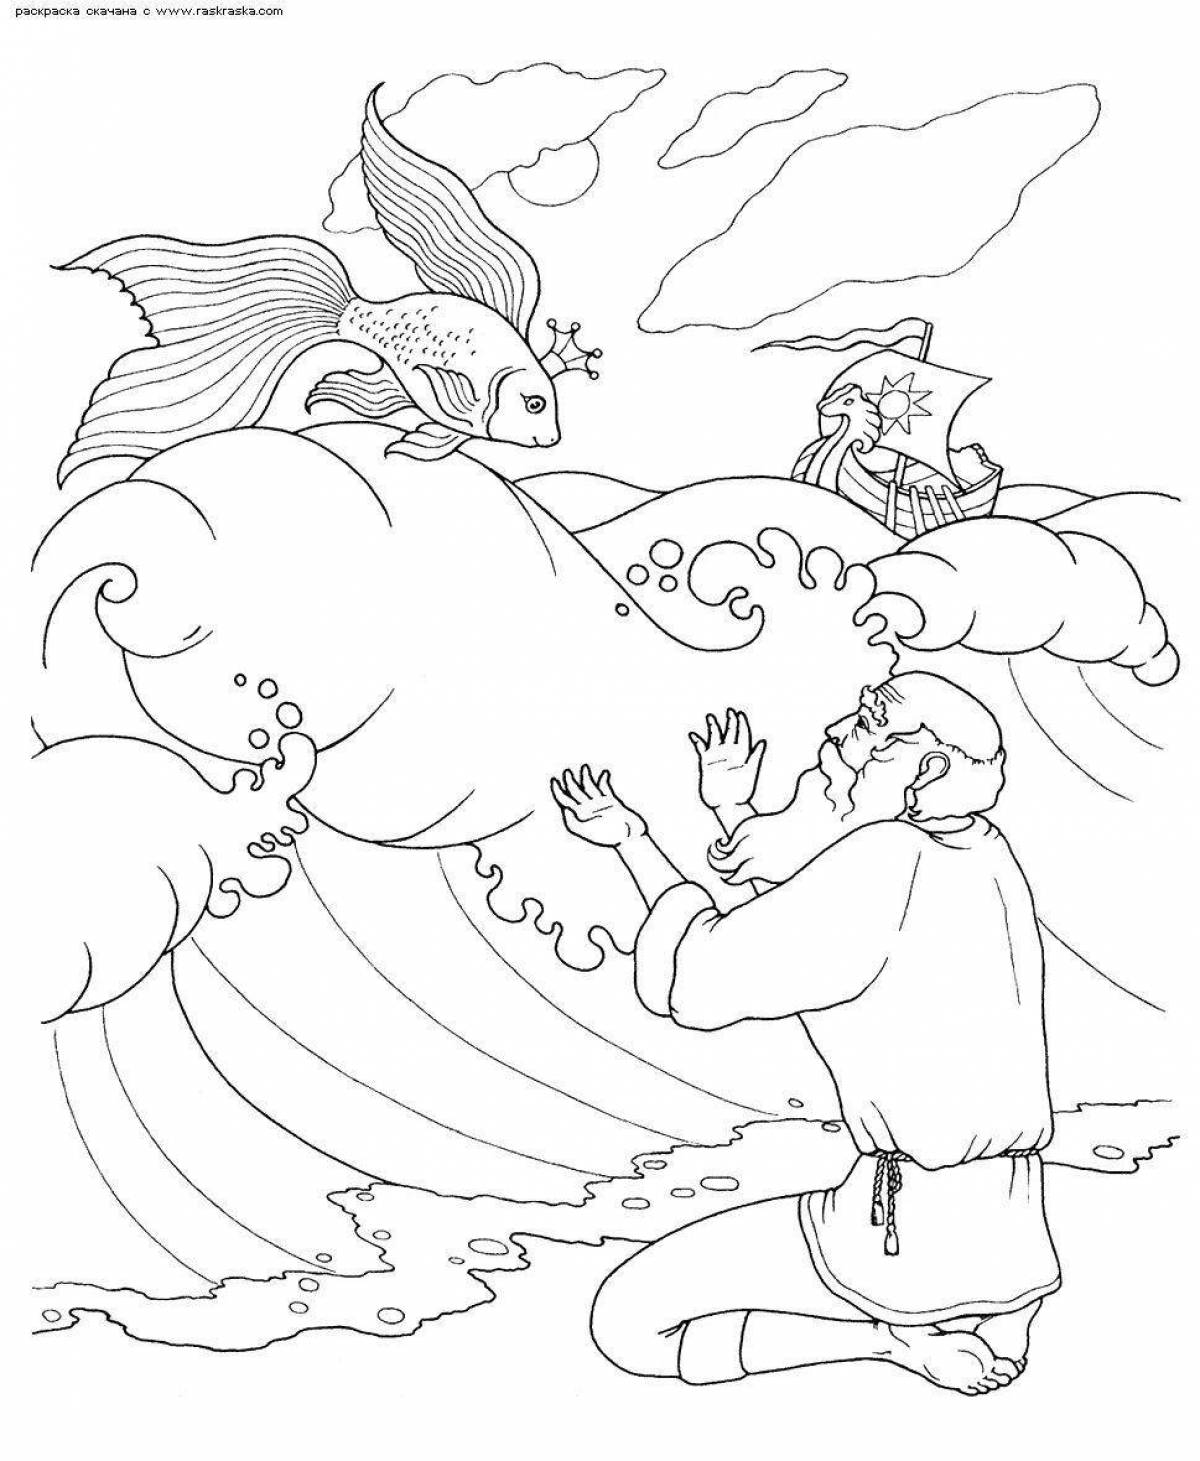 Charming coloring book based on Pushkin's fairy tales